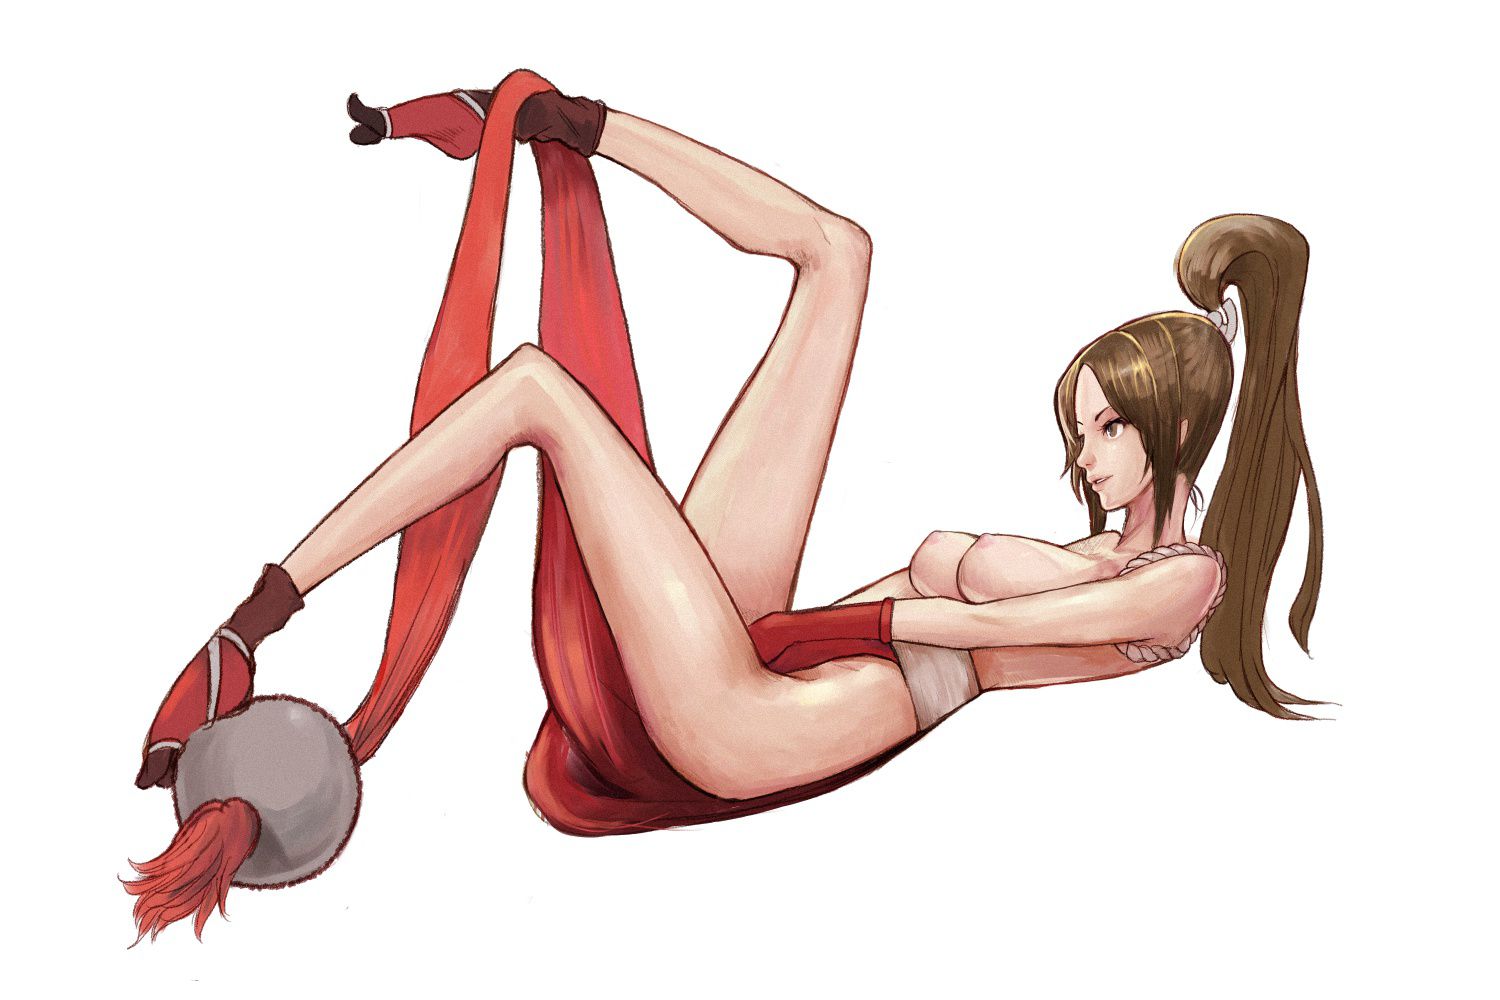 [The King of Fighters] secondary erotic image of Mai Shiranui condemning ah. 13